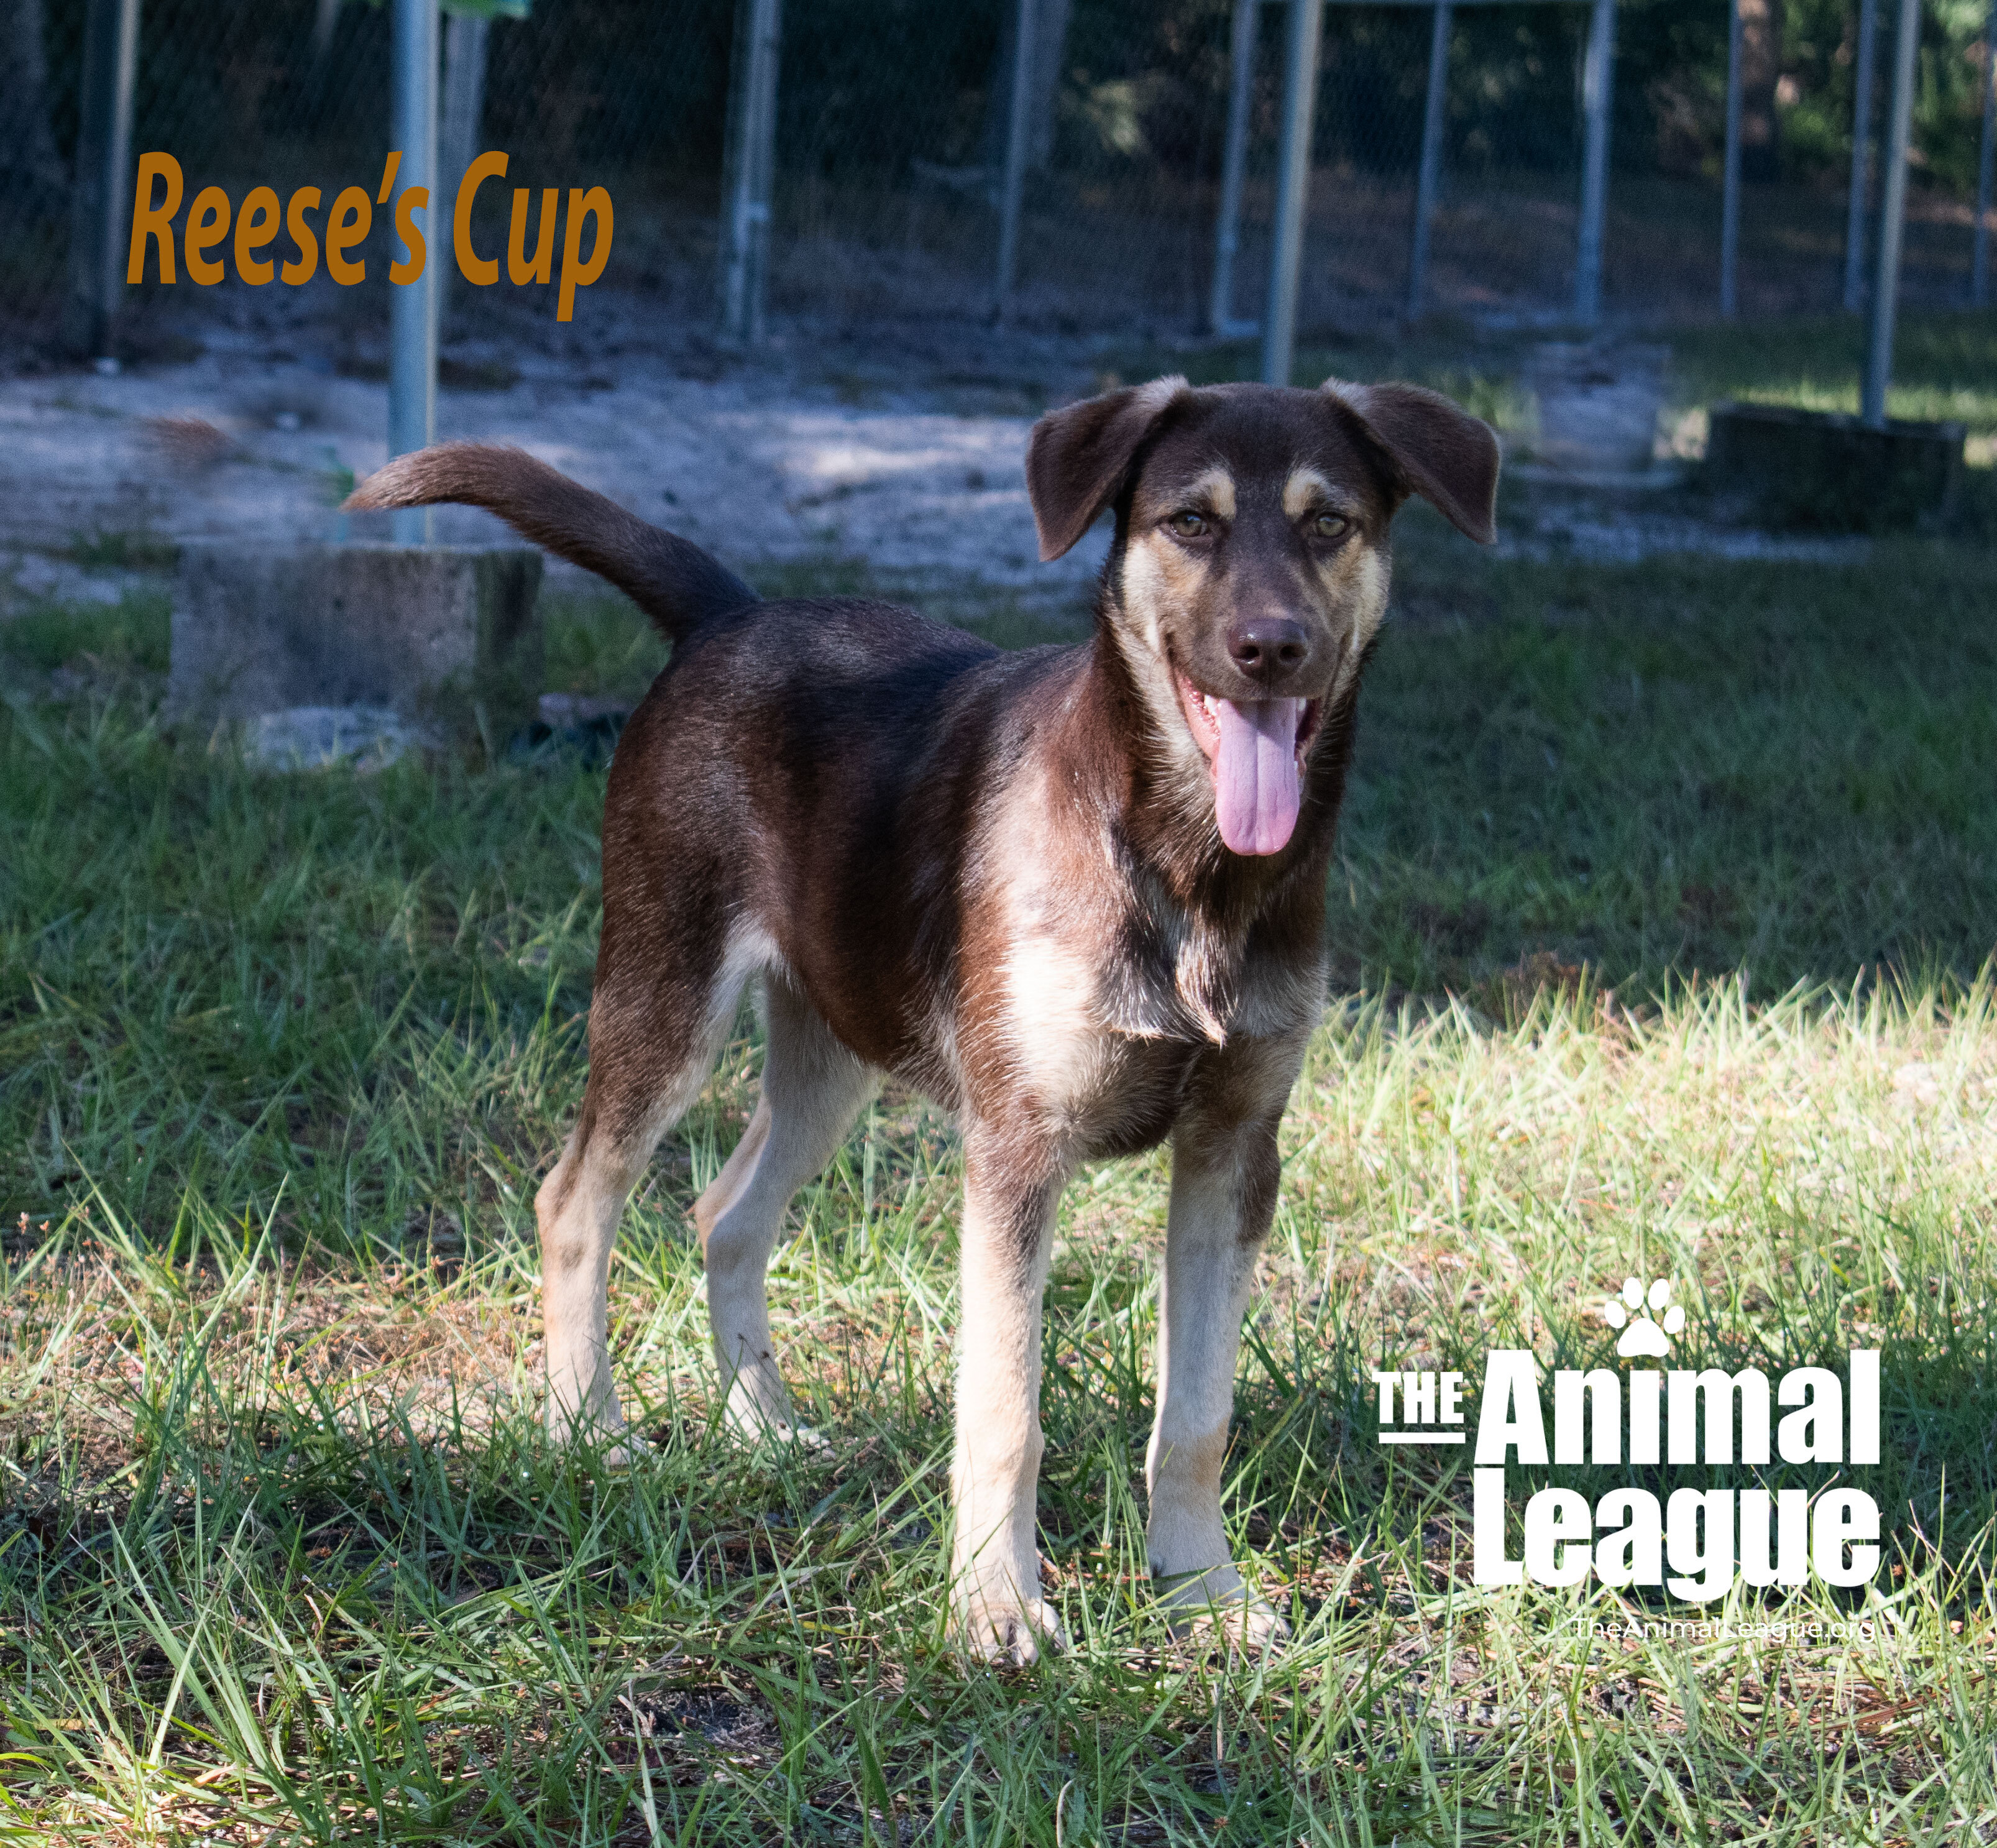 Reeses Cup detail page